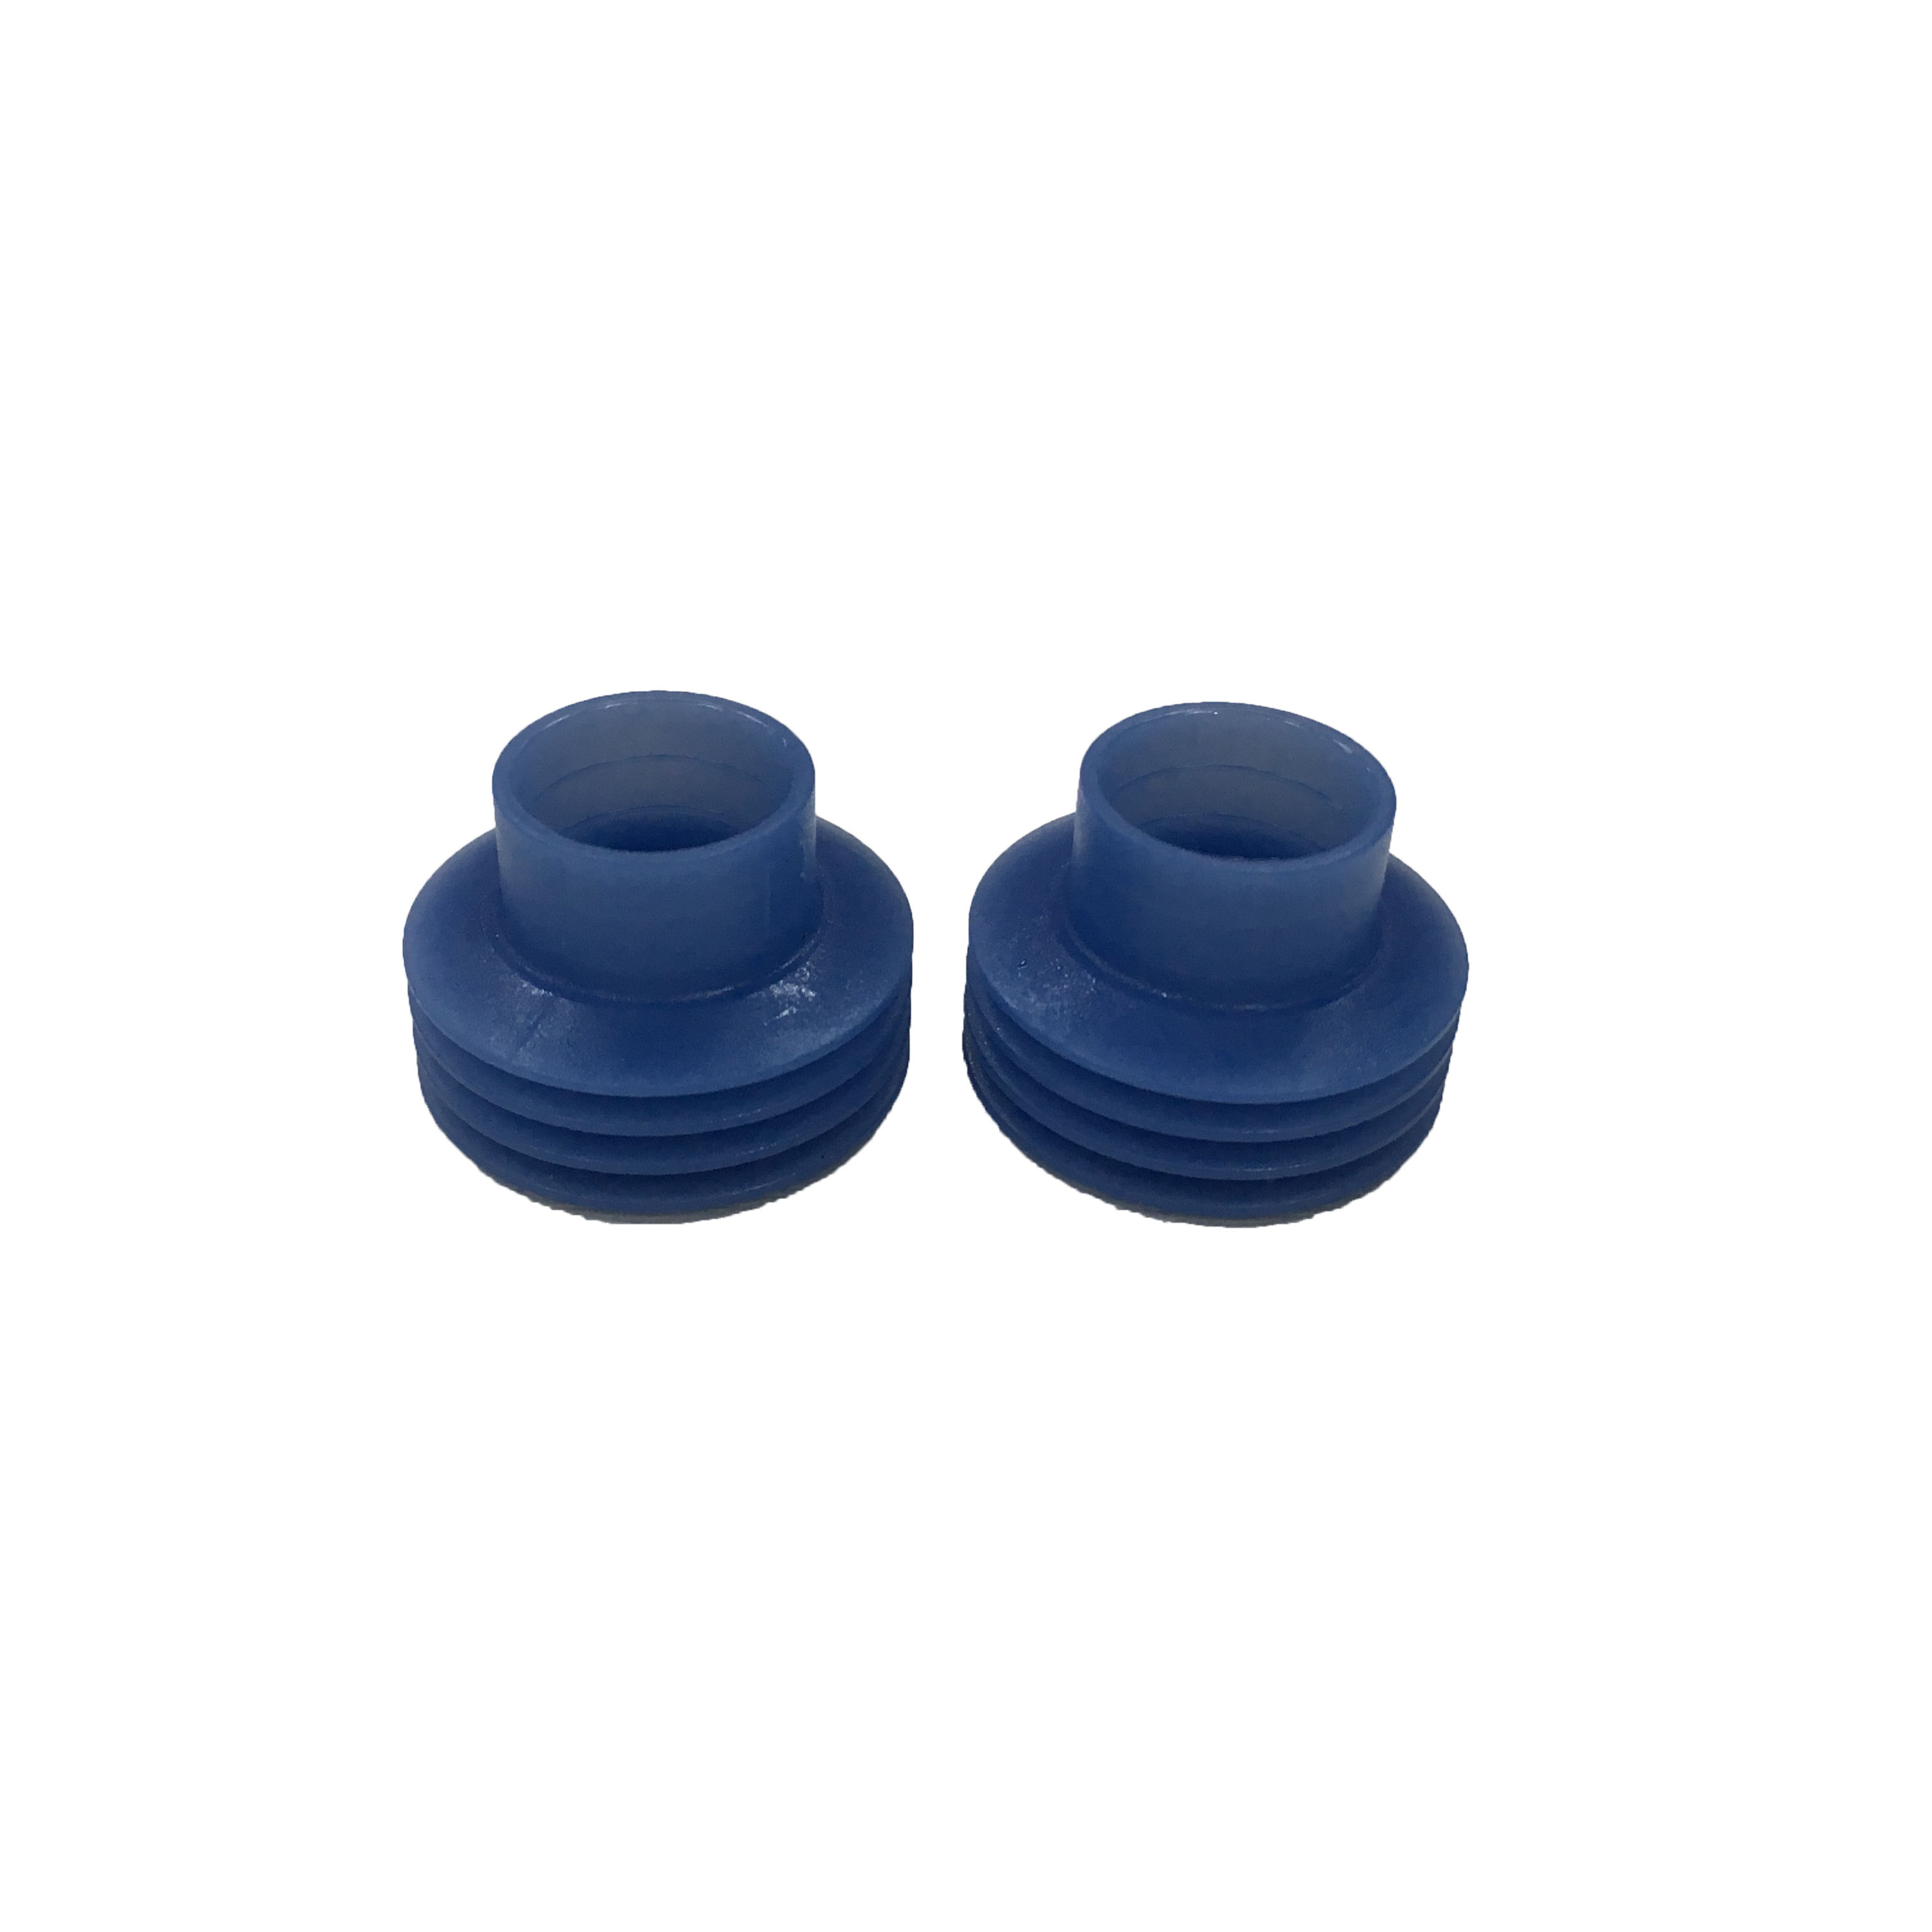  Female end connector seal Silicone connector seal